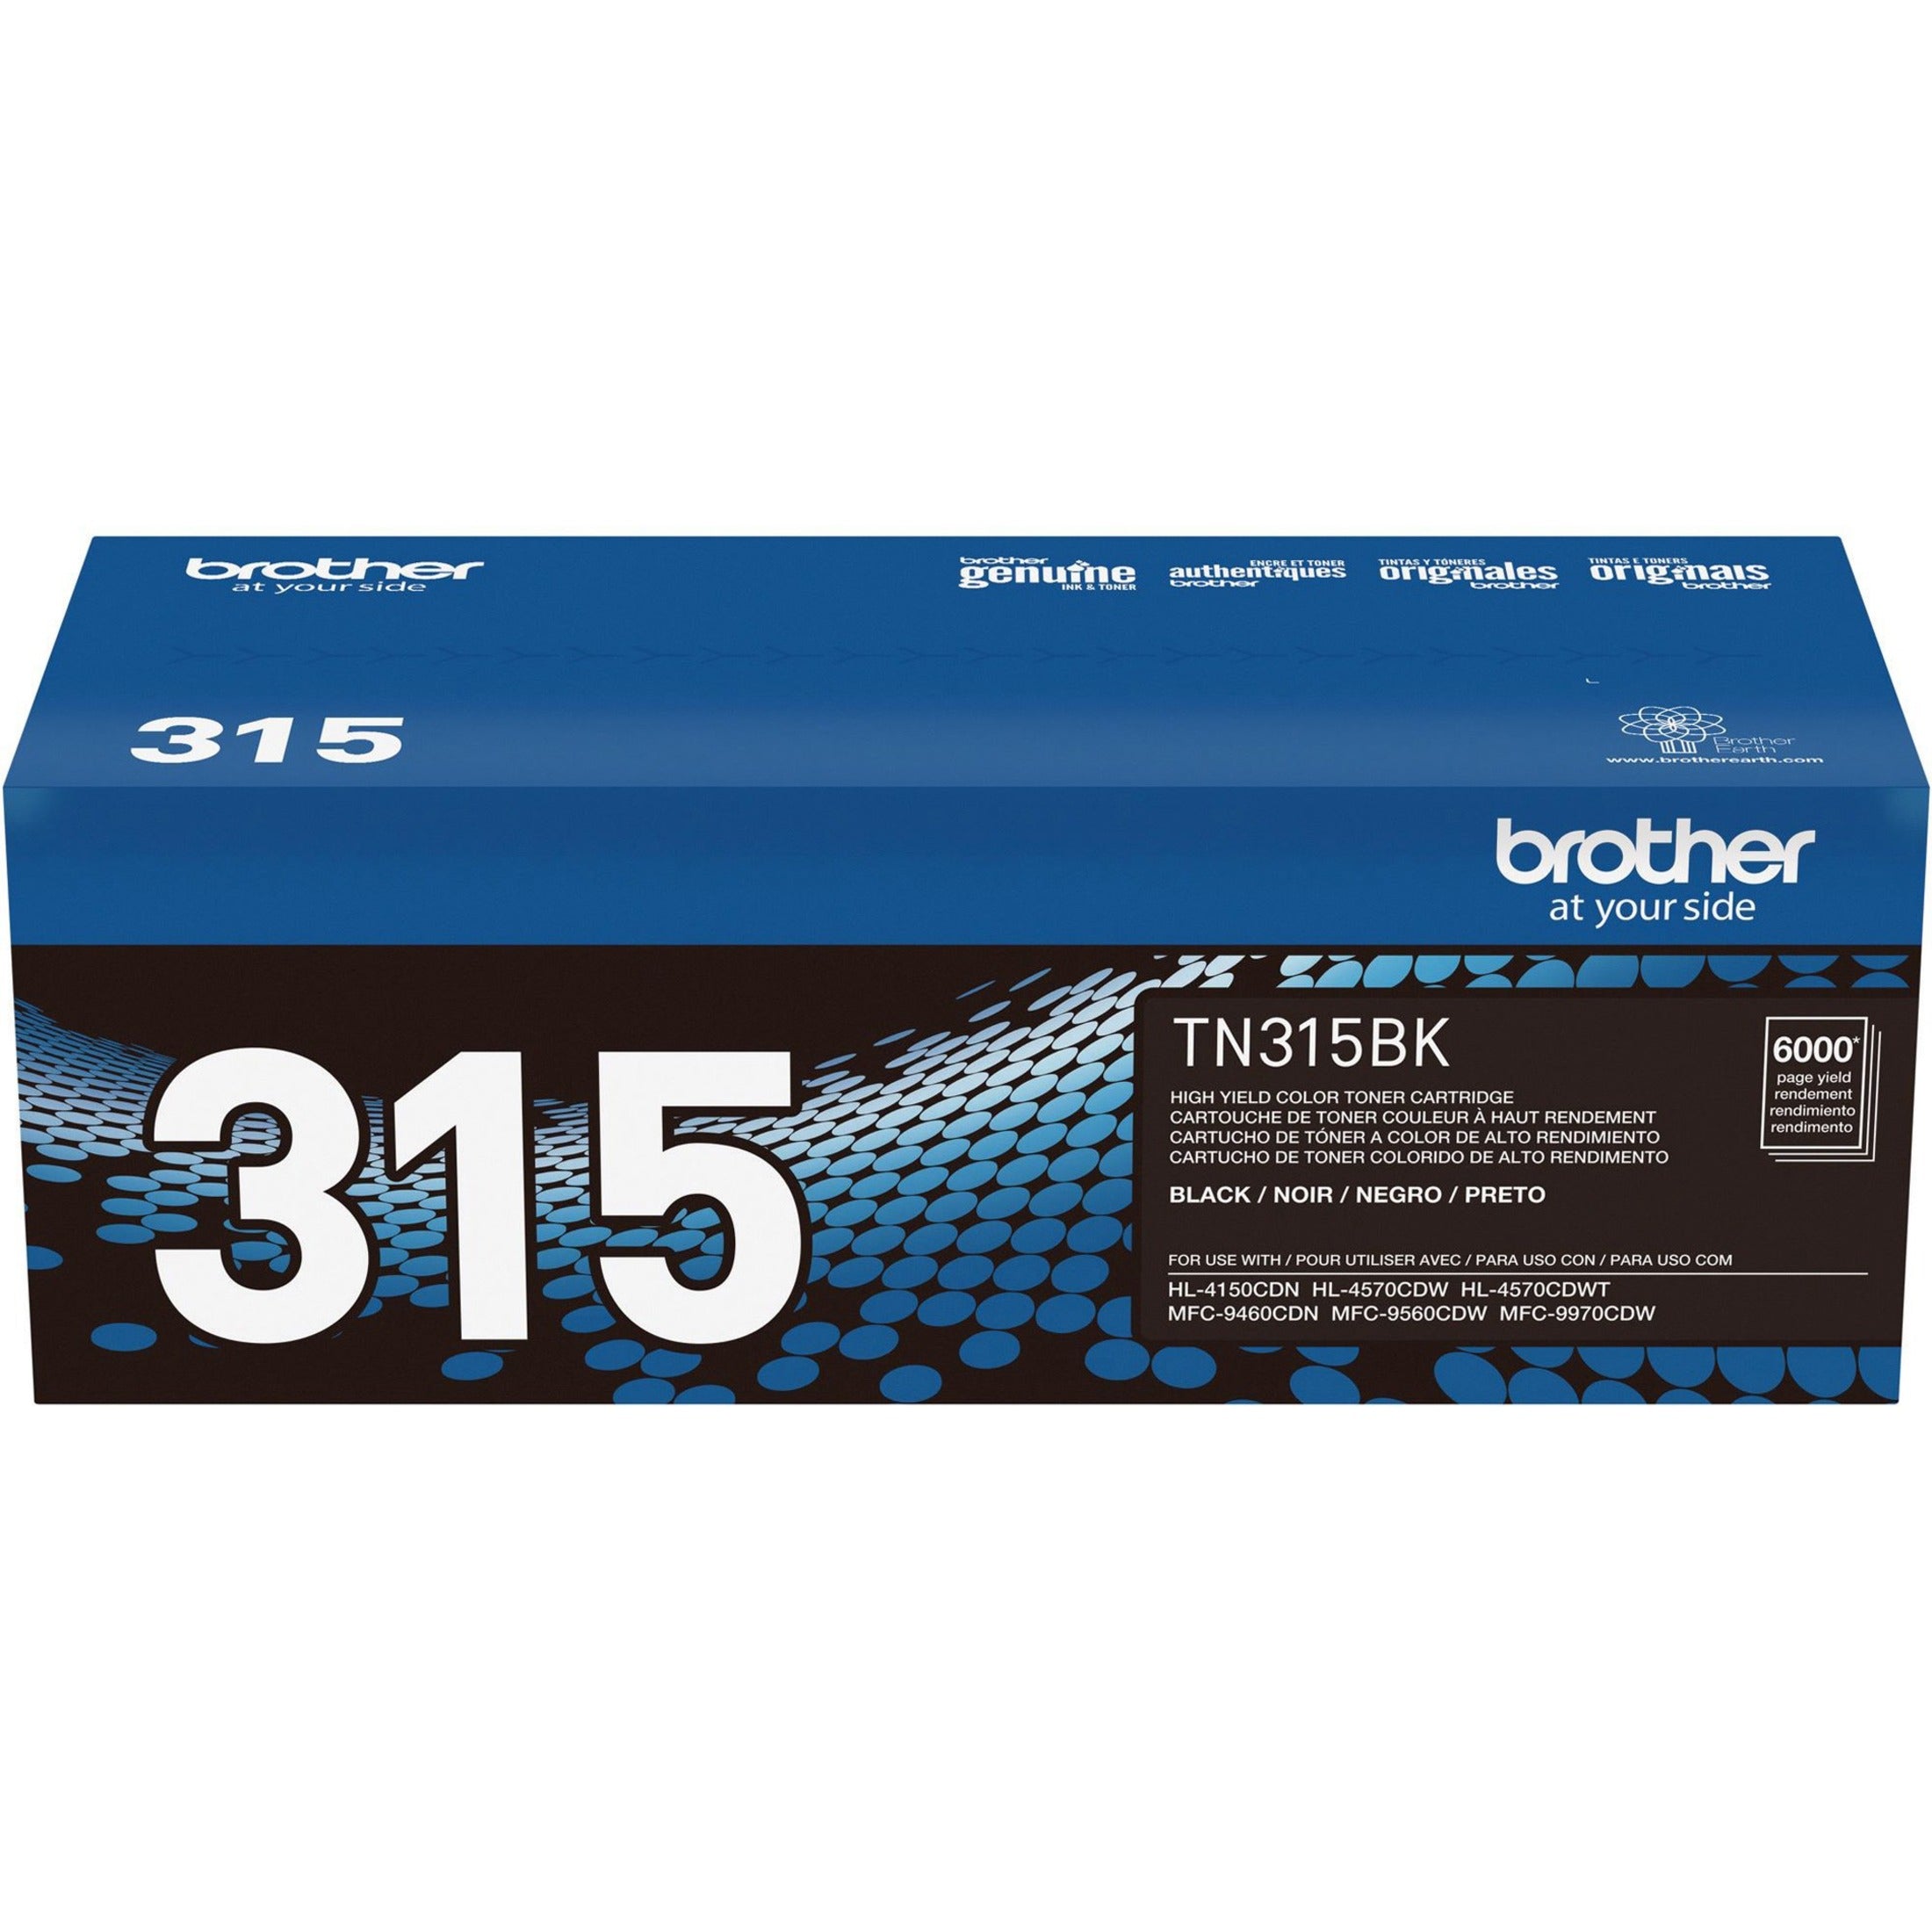 Brother TN315BK High Yield Black Toner Cartridge, 6000 Pages